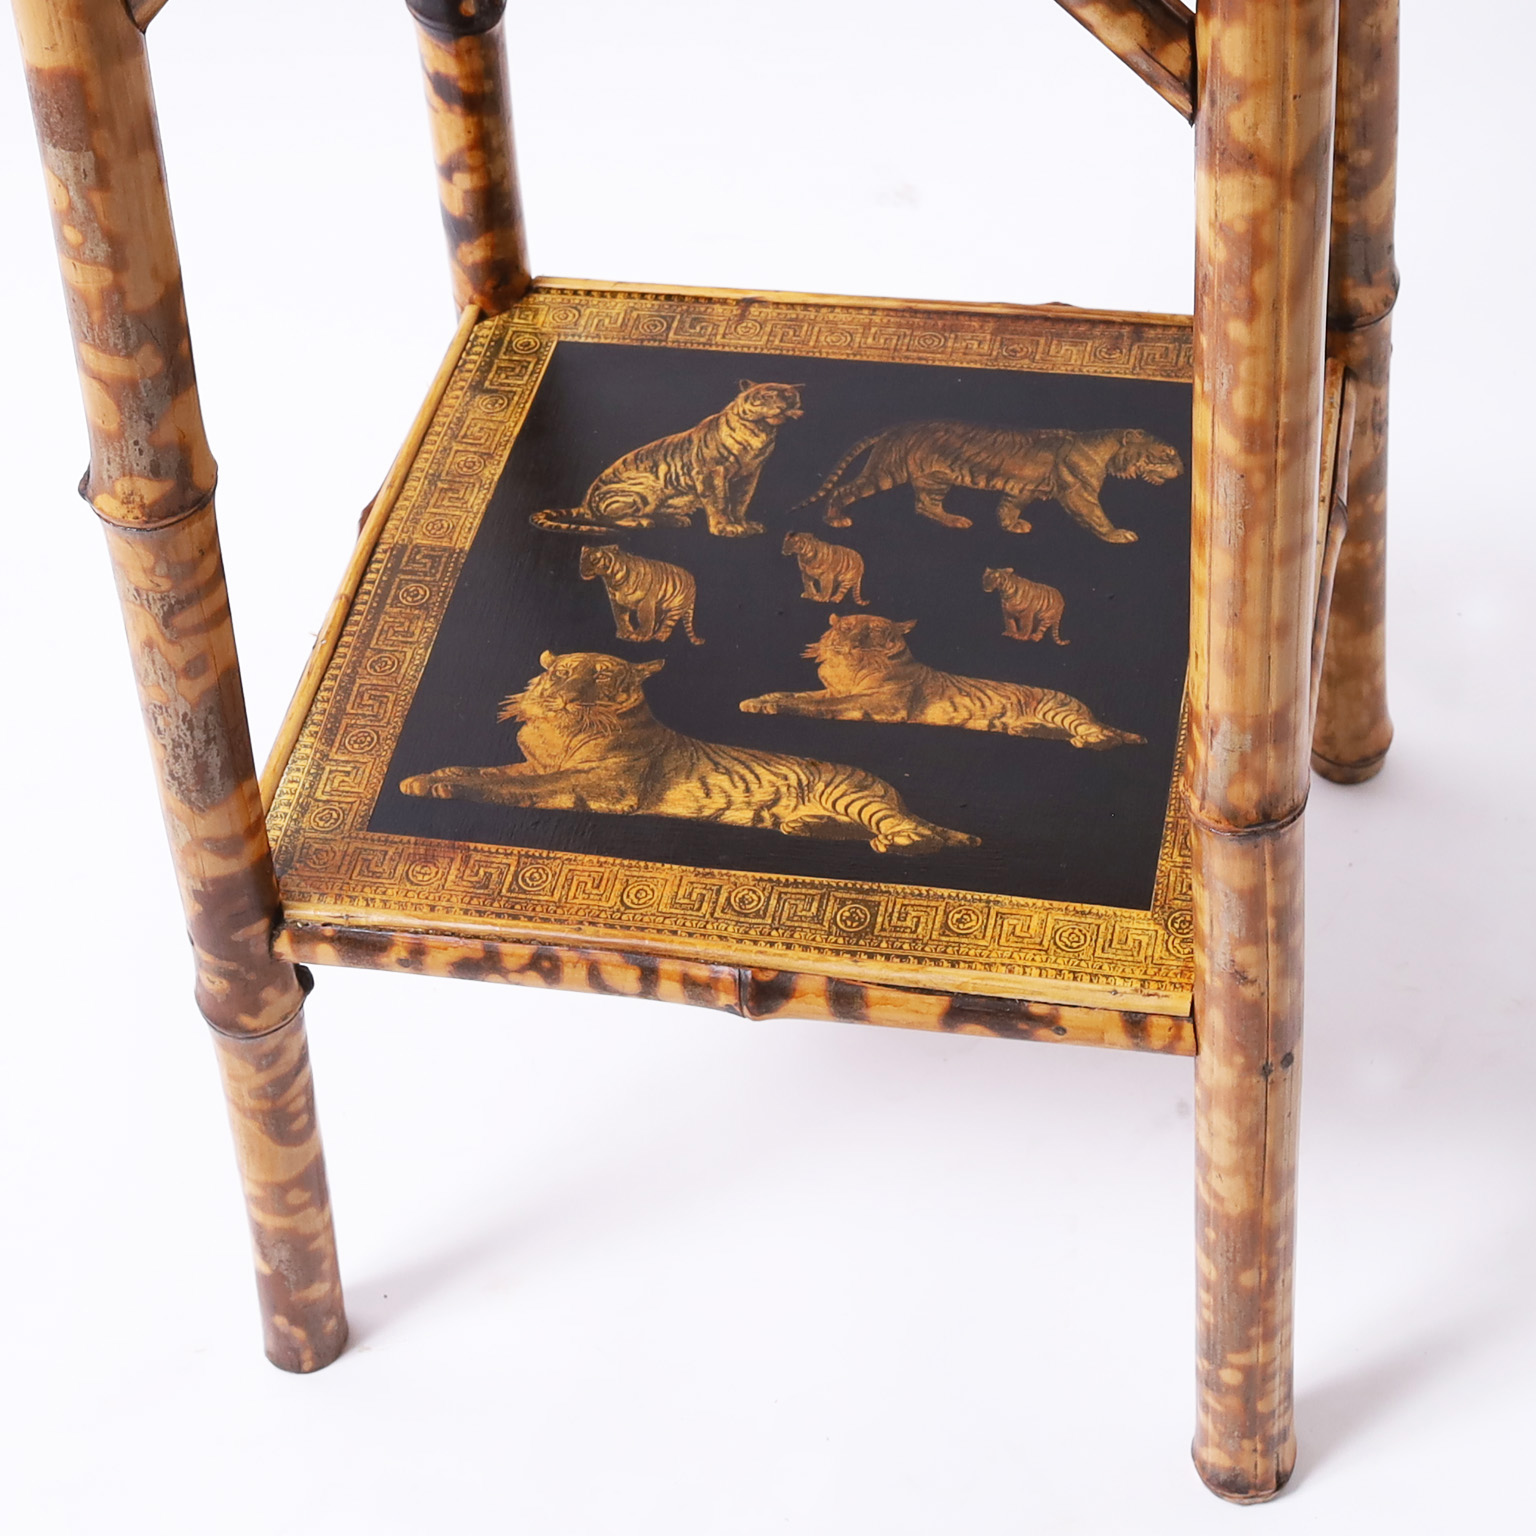 Pair of Antique English Bamboo Tiger Decoupage Stands or Tables